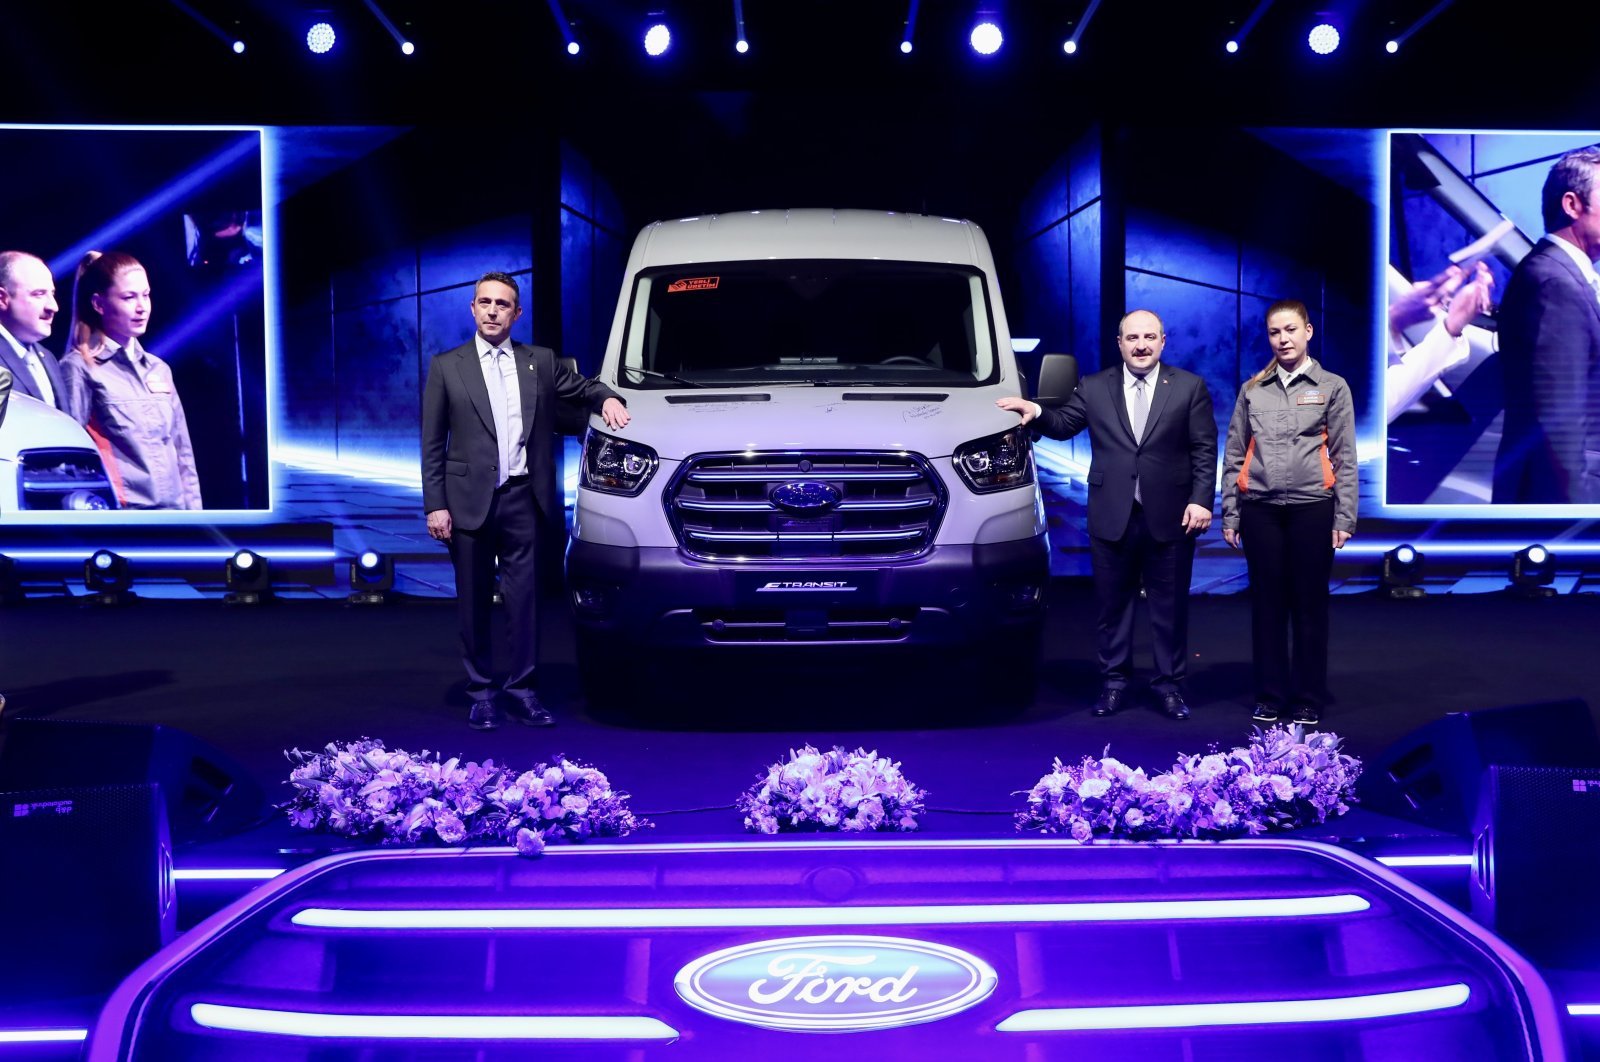 Industry and Technology Minister Mustafa Varank (2nd R) and Koç Holding Deputy Chair of the Board of Directors and Ford Otosan Chairperson Ali Koç (L) stand beside an all-electric Ford Transit model during a ceremony in Kocaeli, northwestern Turkey, April 7, 2022. (AA Photo) 